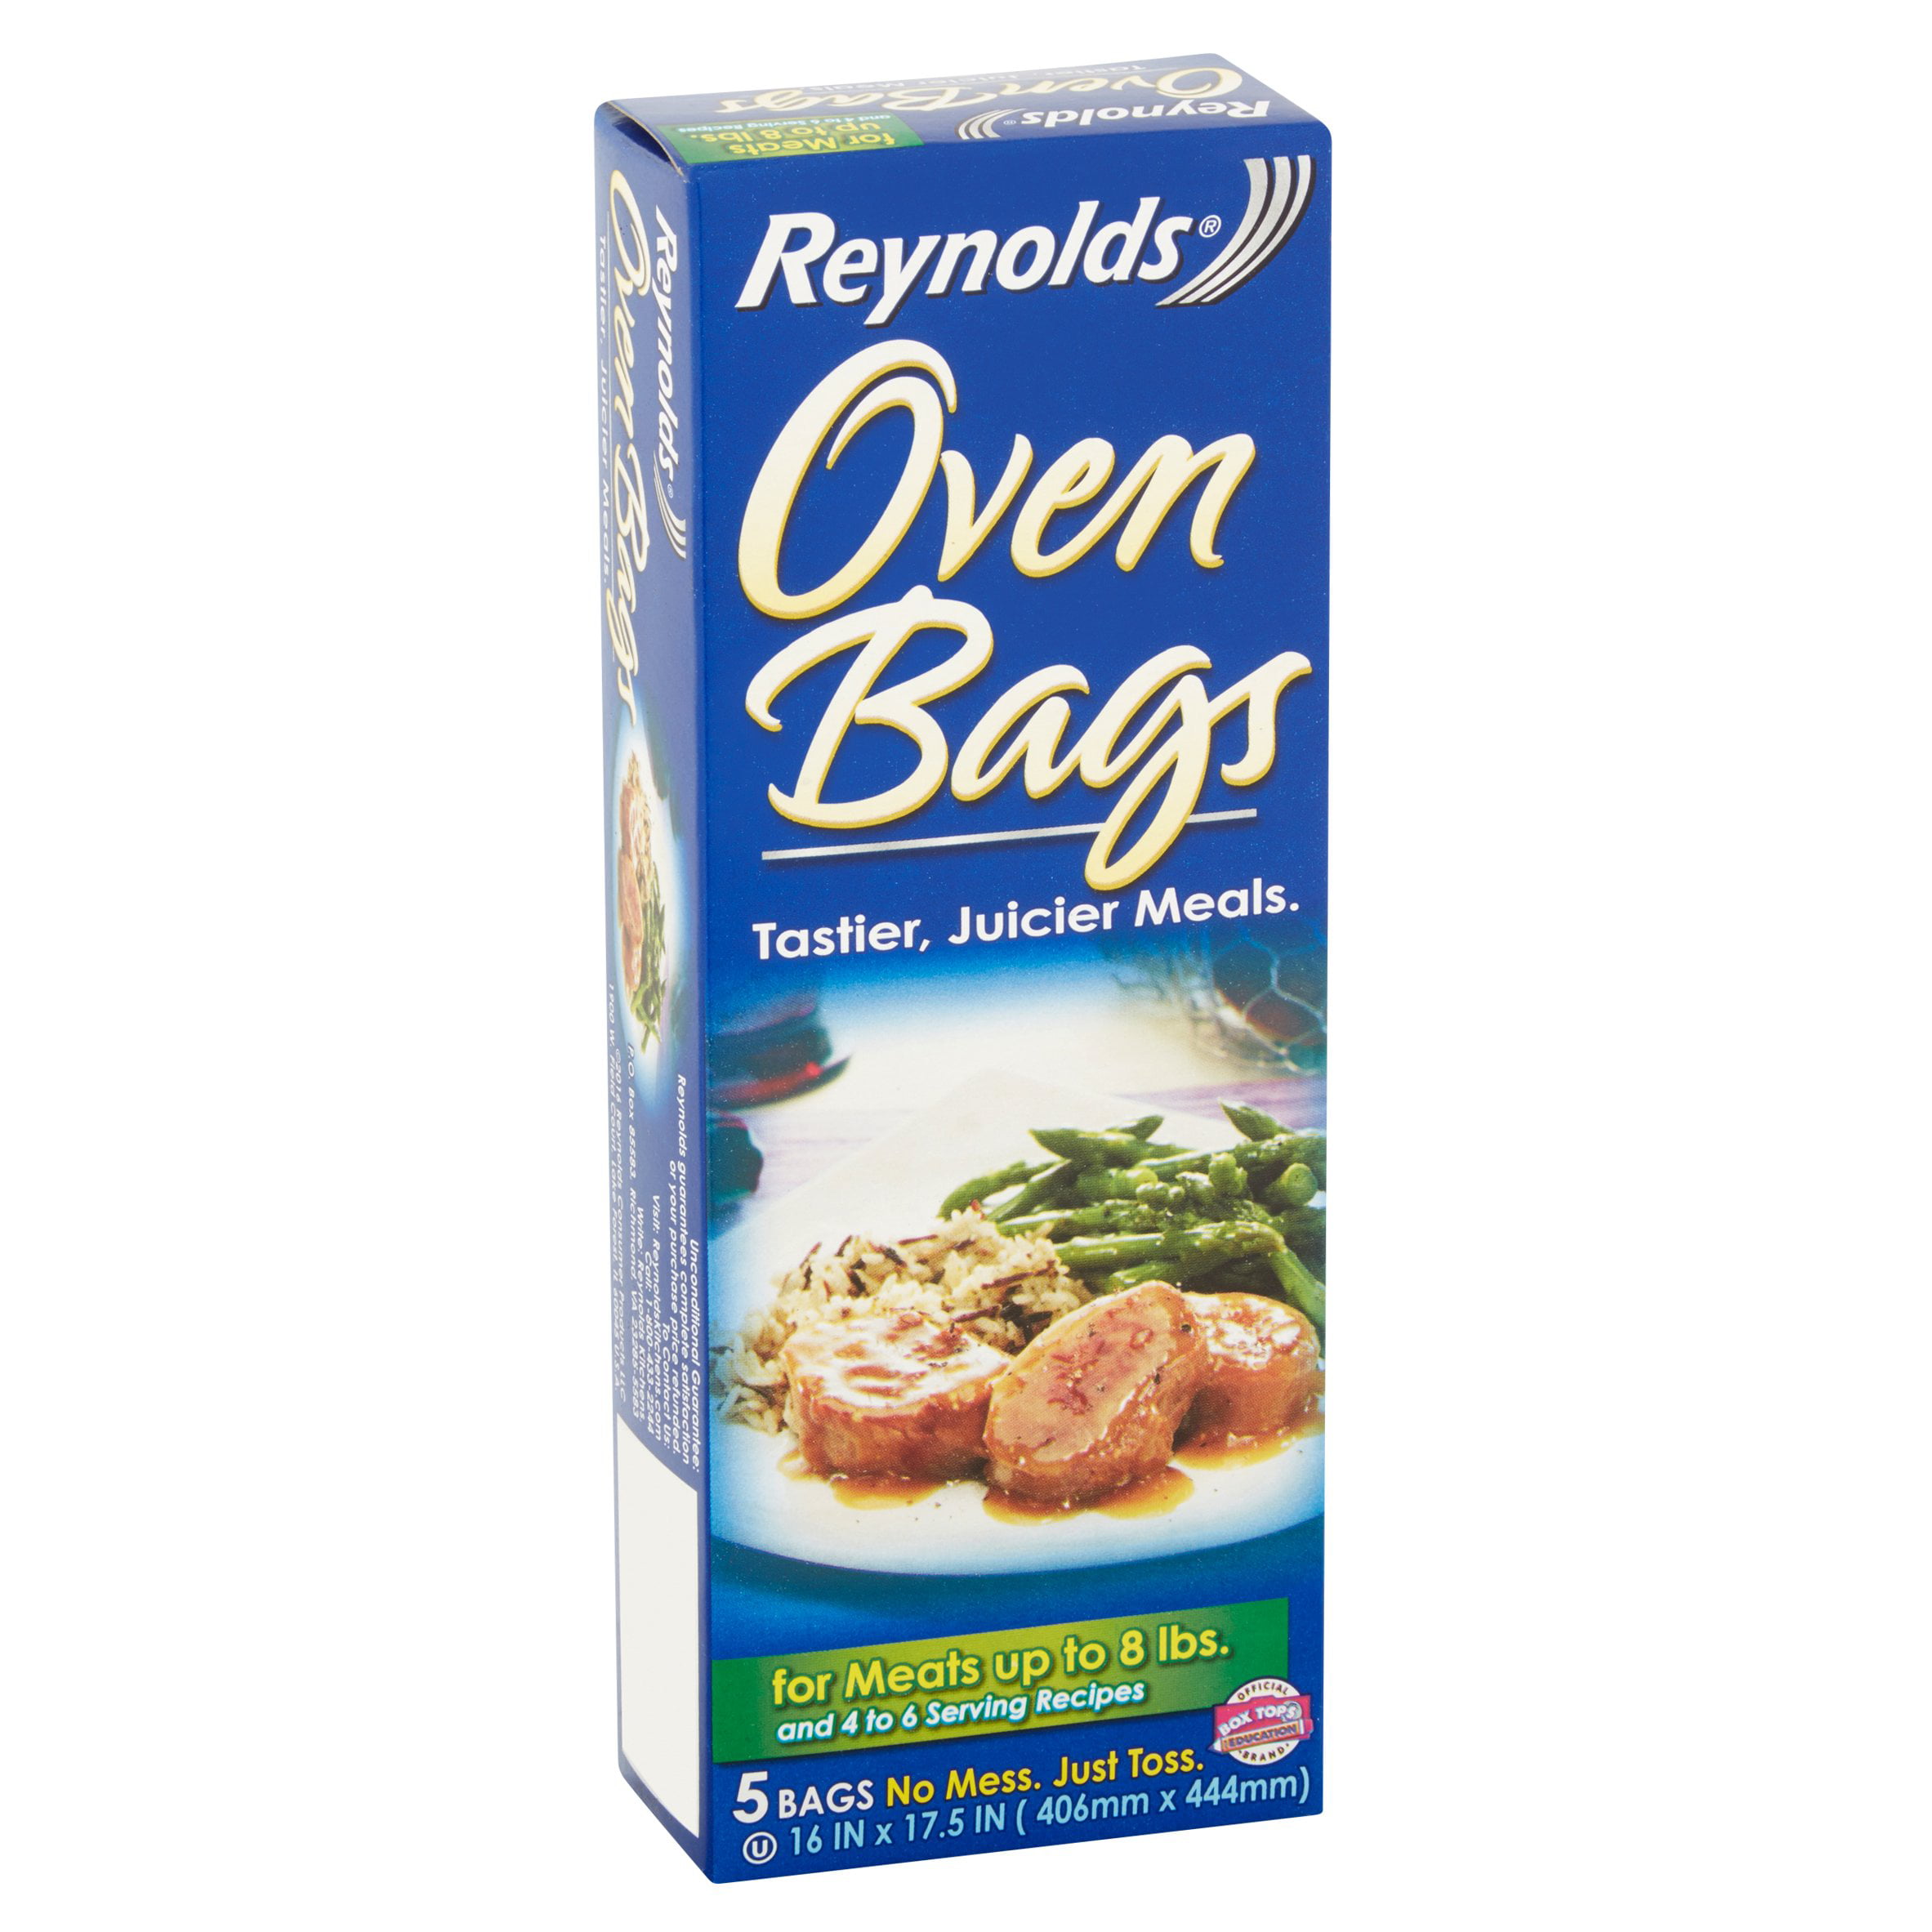 Reynolds Large Size Oven Bags for Meats up to 8 lbs Lot of 3 (15